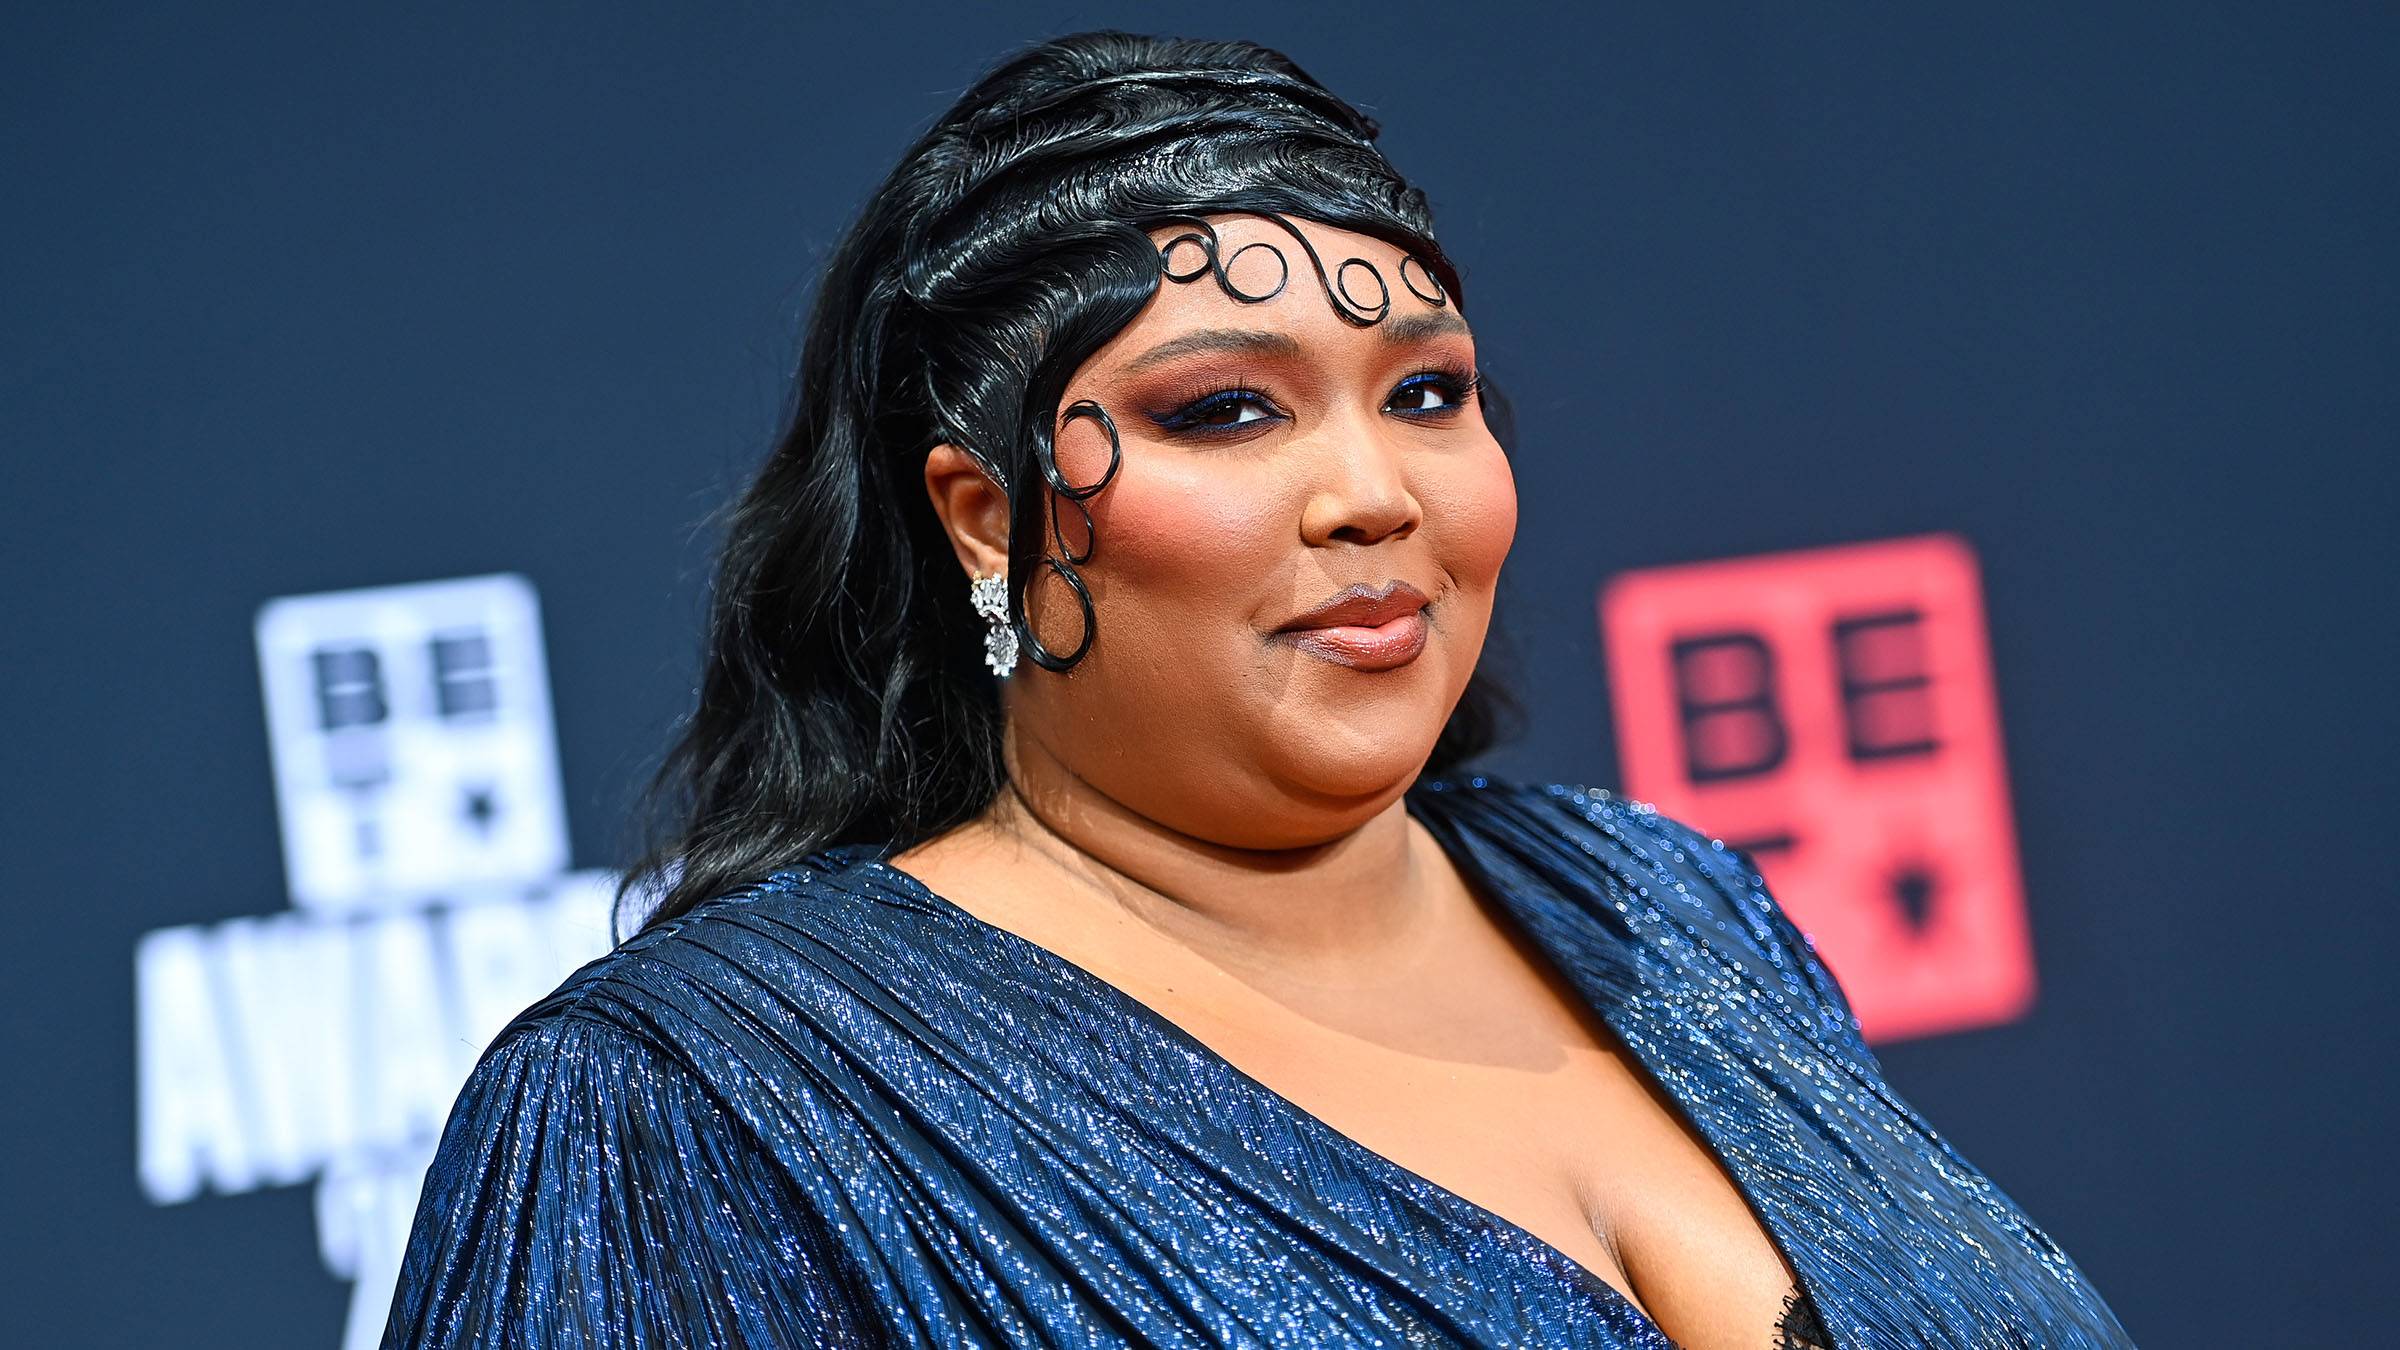 Lizzo: 'Yes, I Know I'm Fat